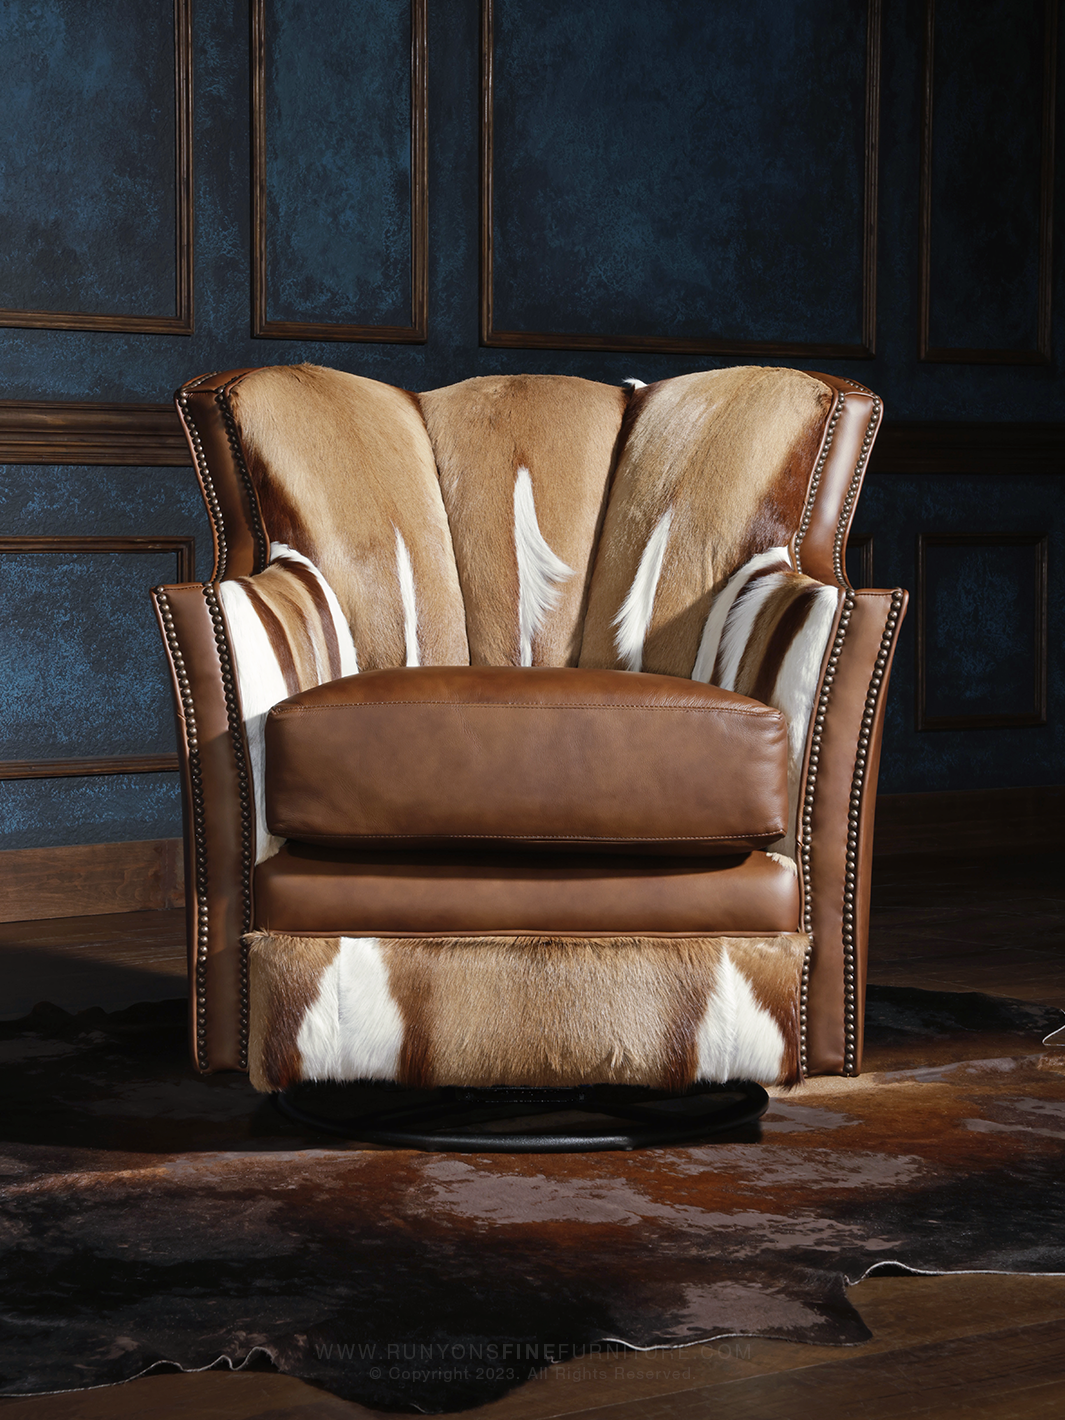 front view shot of brown italian leather swivel chair with authentic springbok hair on hide interior.